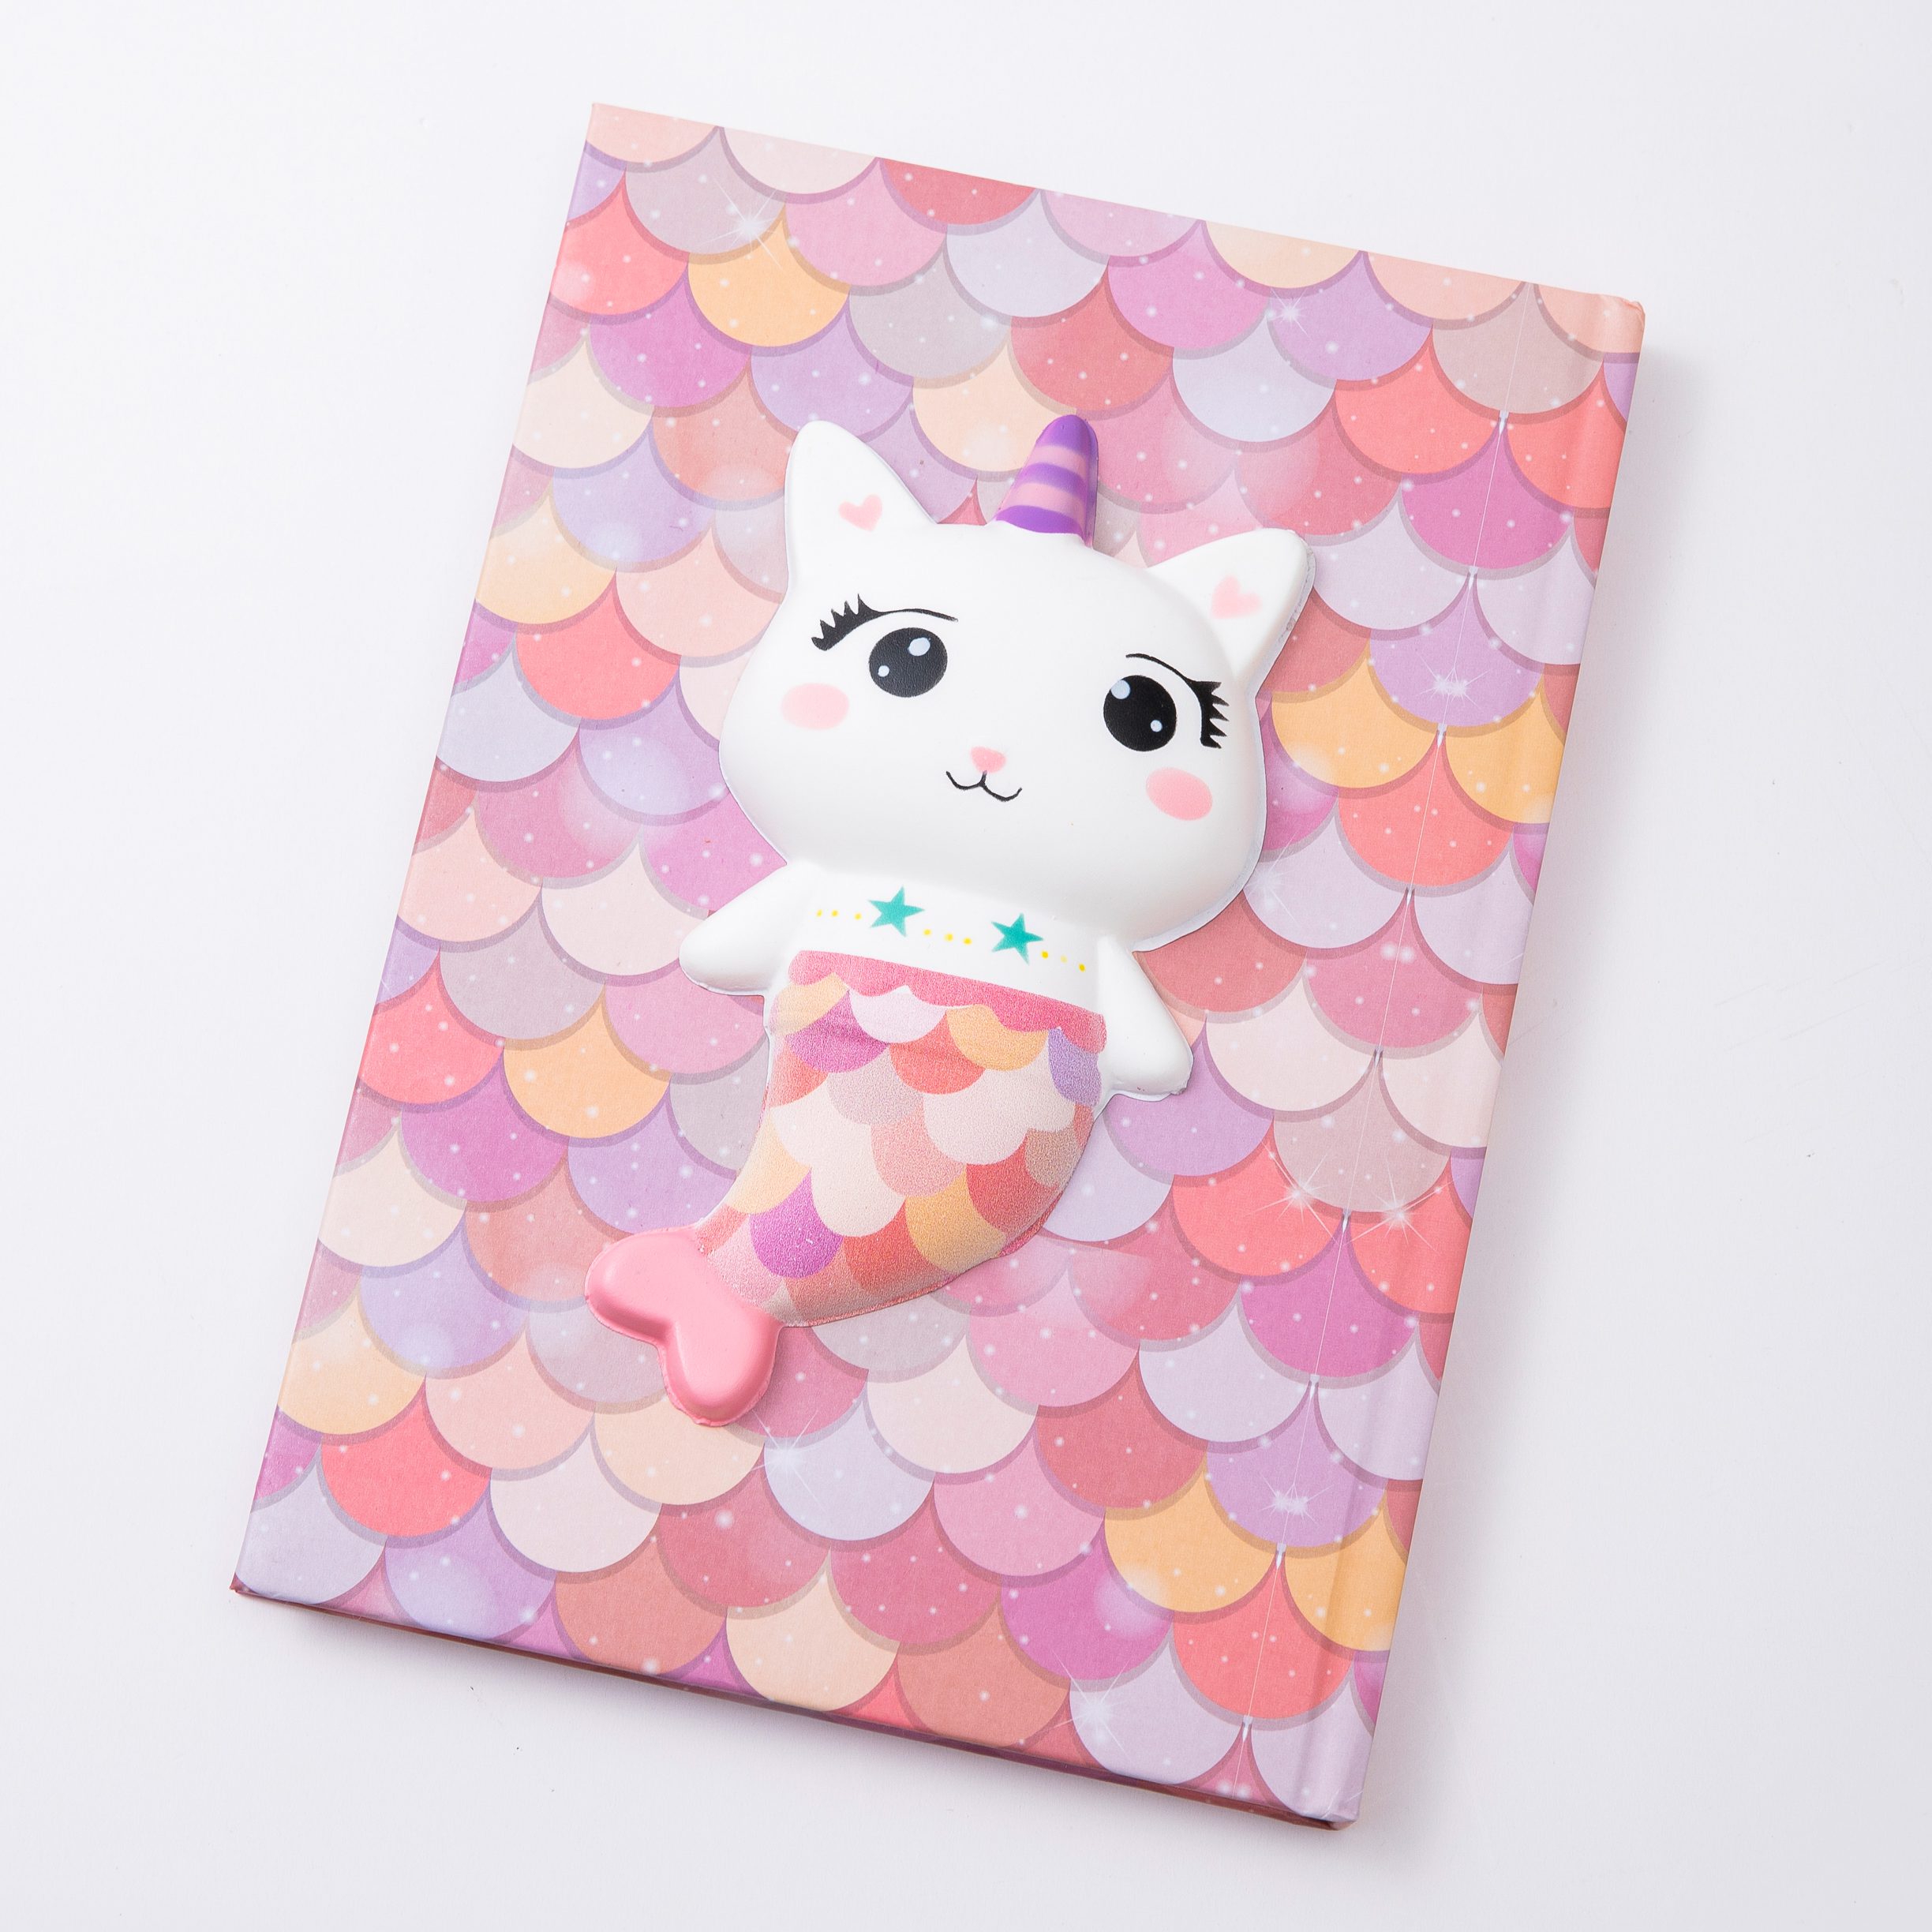 A5 Hardcover Notebook with Squishy